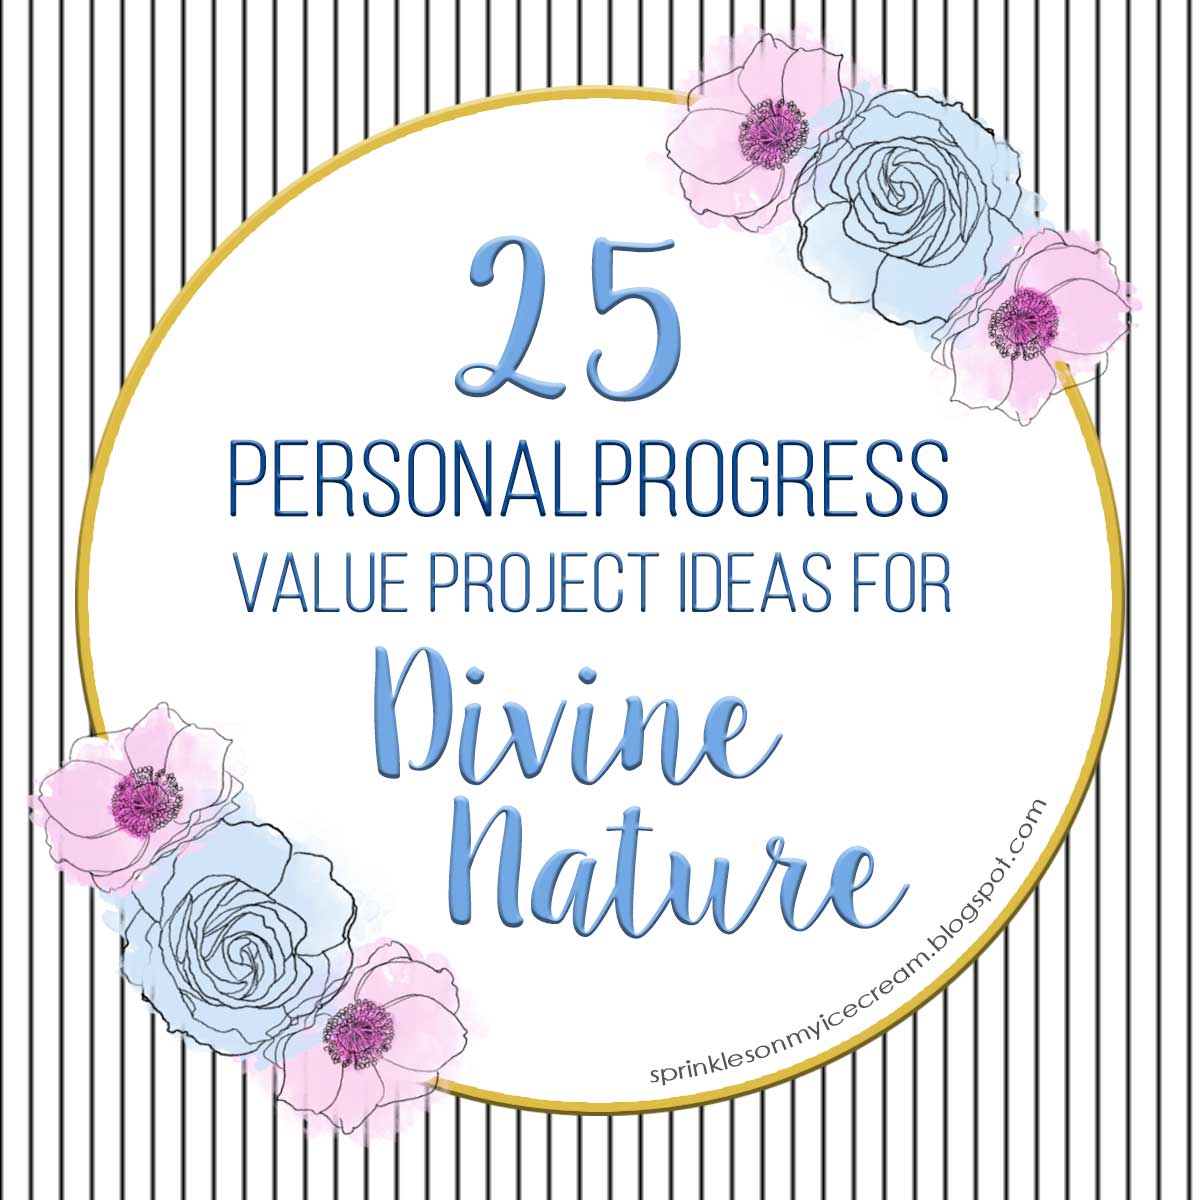 25 Ideas for Divine Nature Personal Progress Value Projects